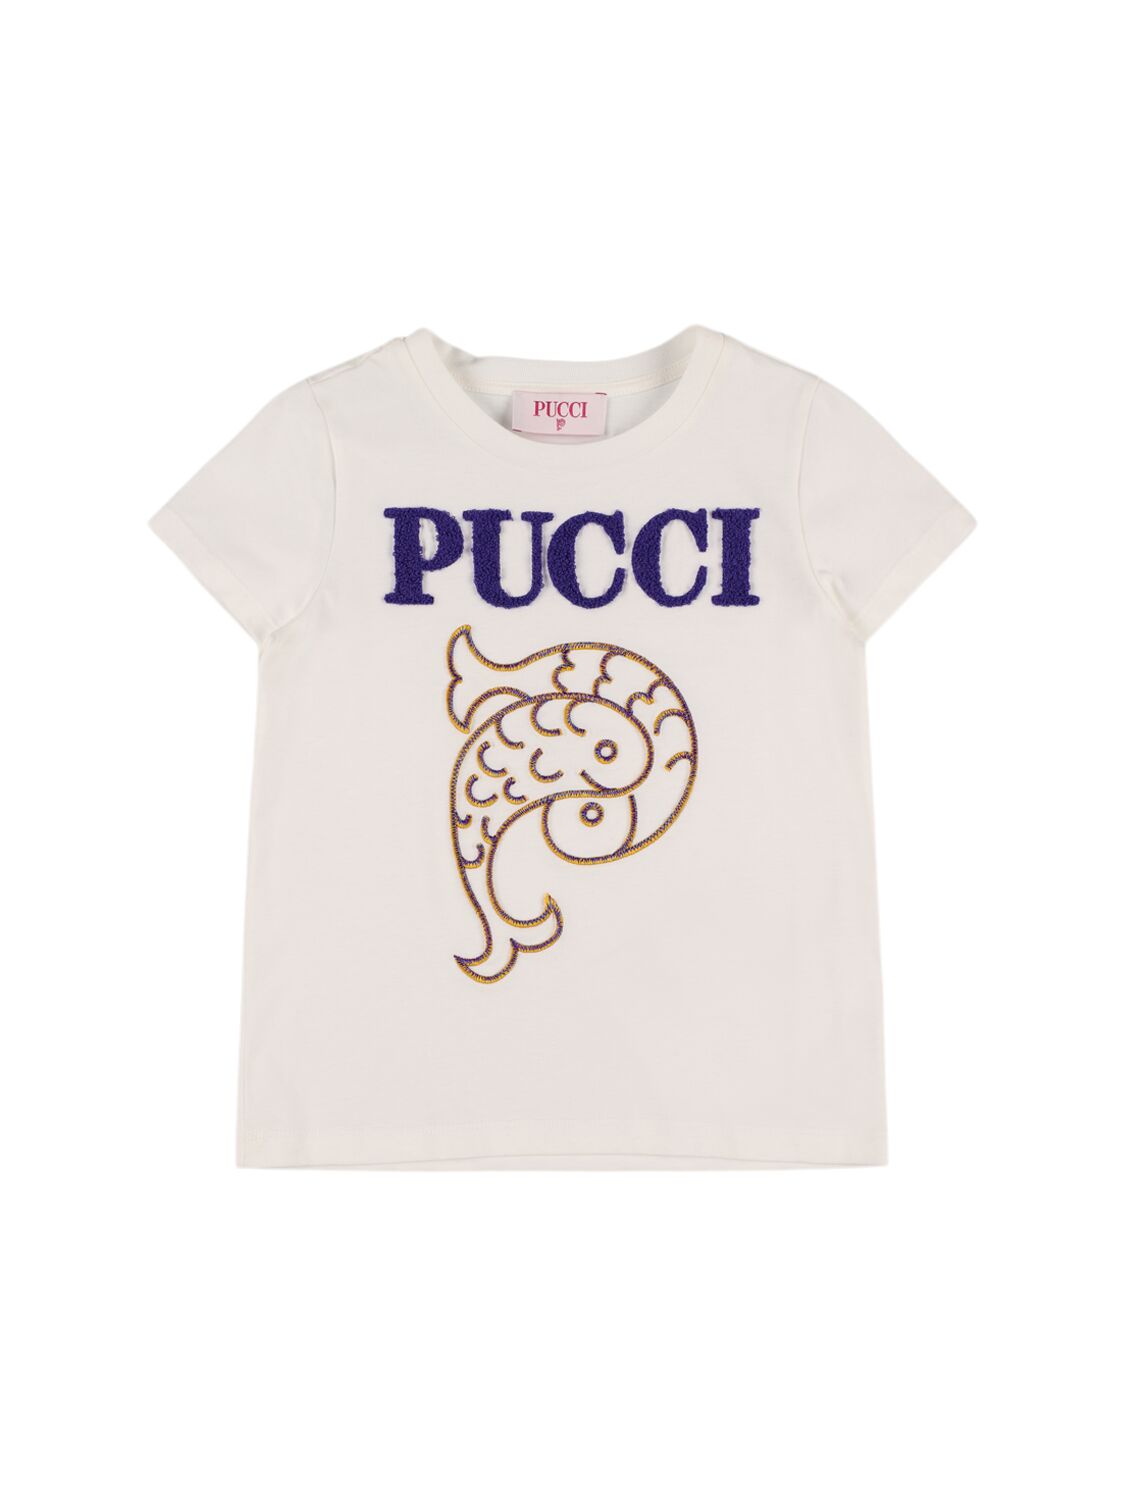 Pucci Embroidered Cotton Jersey T-shirt In Neutral